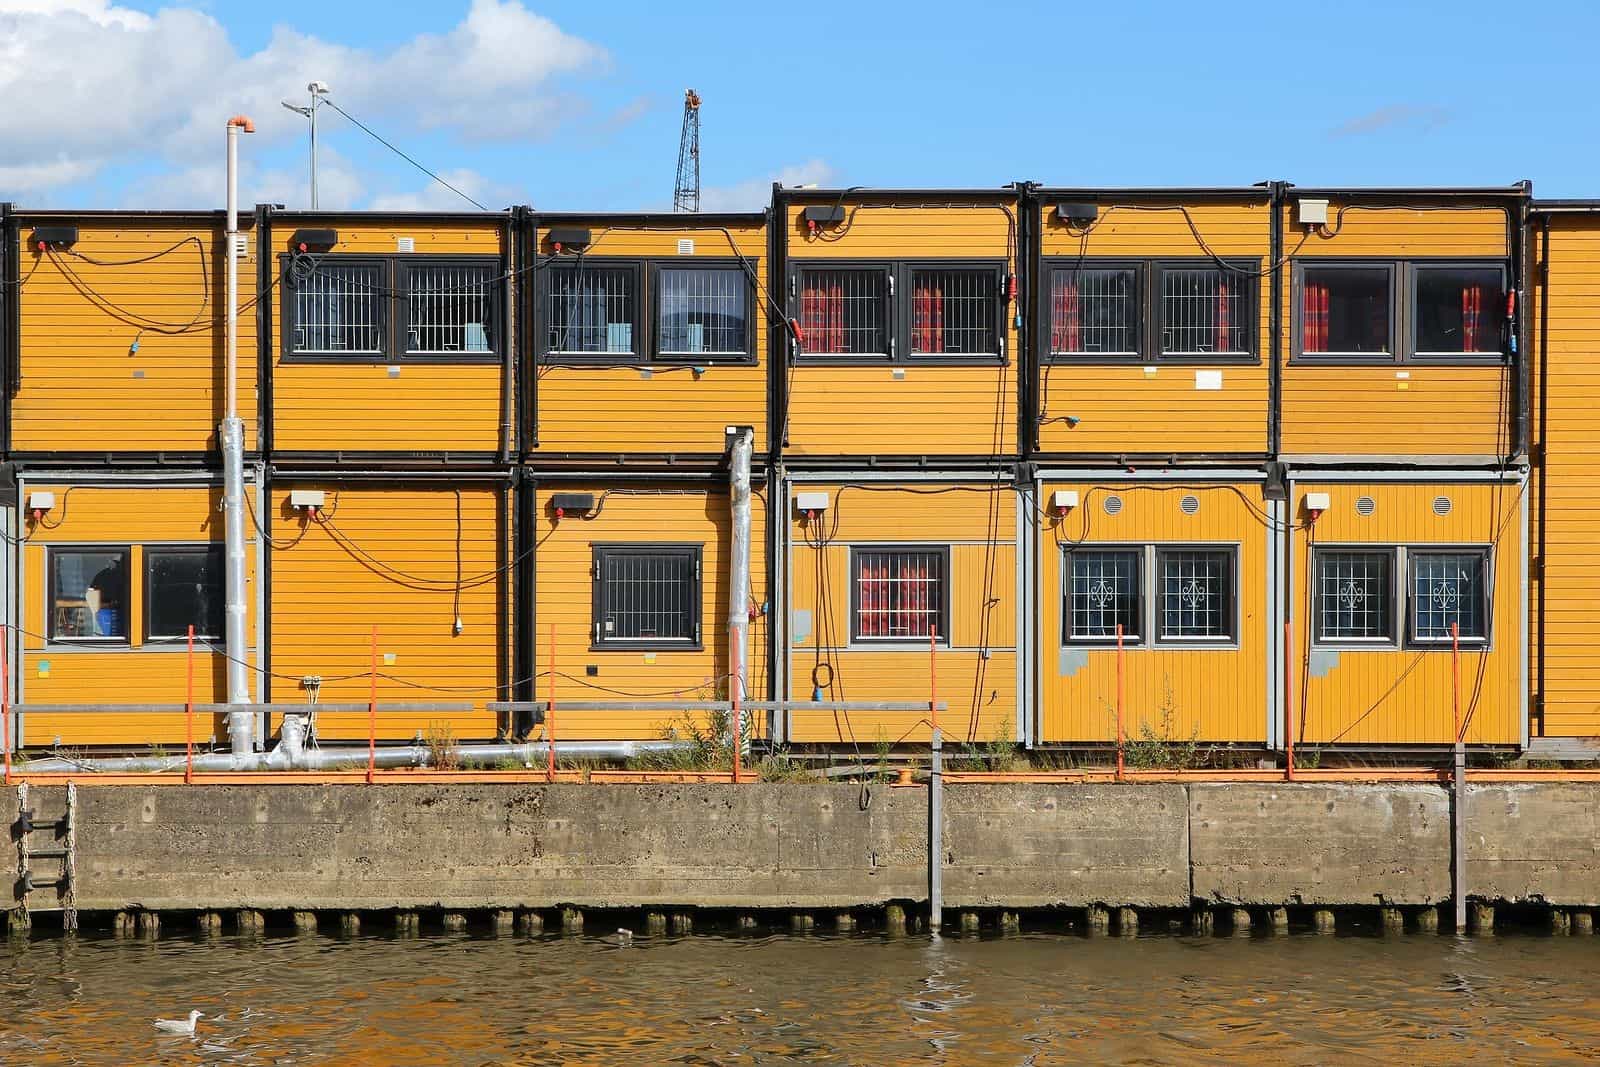 Cargo Containers for Sale Is a Popular Trend in Architecture Today